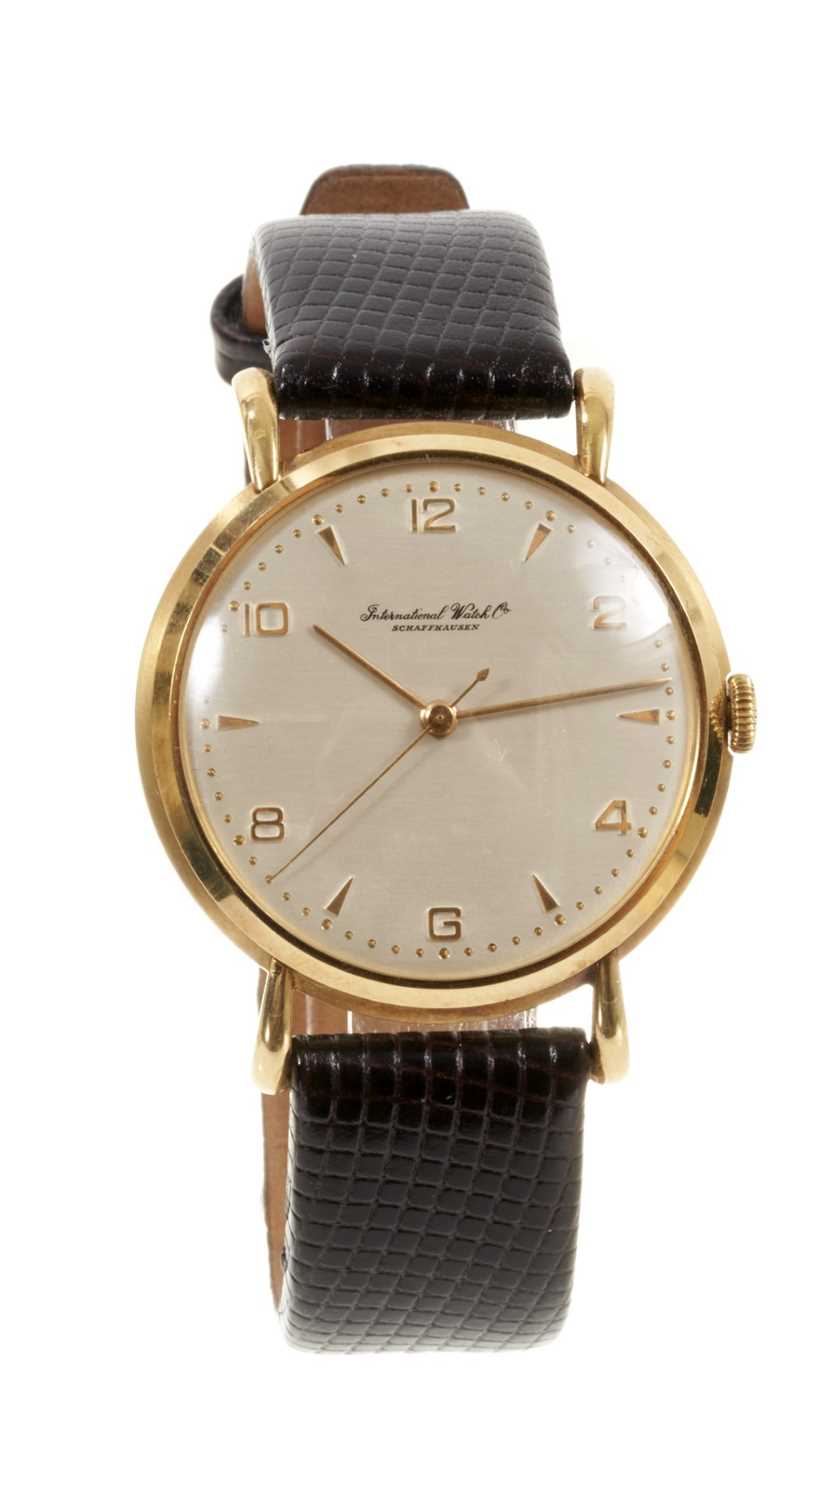 Lot 581 - 1940s IWC 18ct gold wristwatch with manual wind calibre 89 movement, circa 1948.